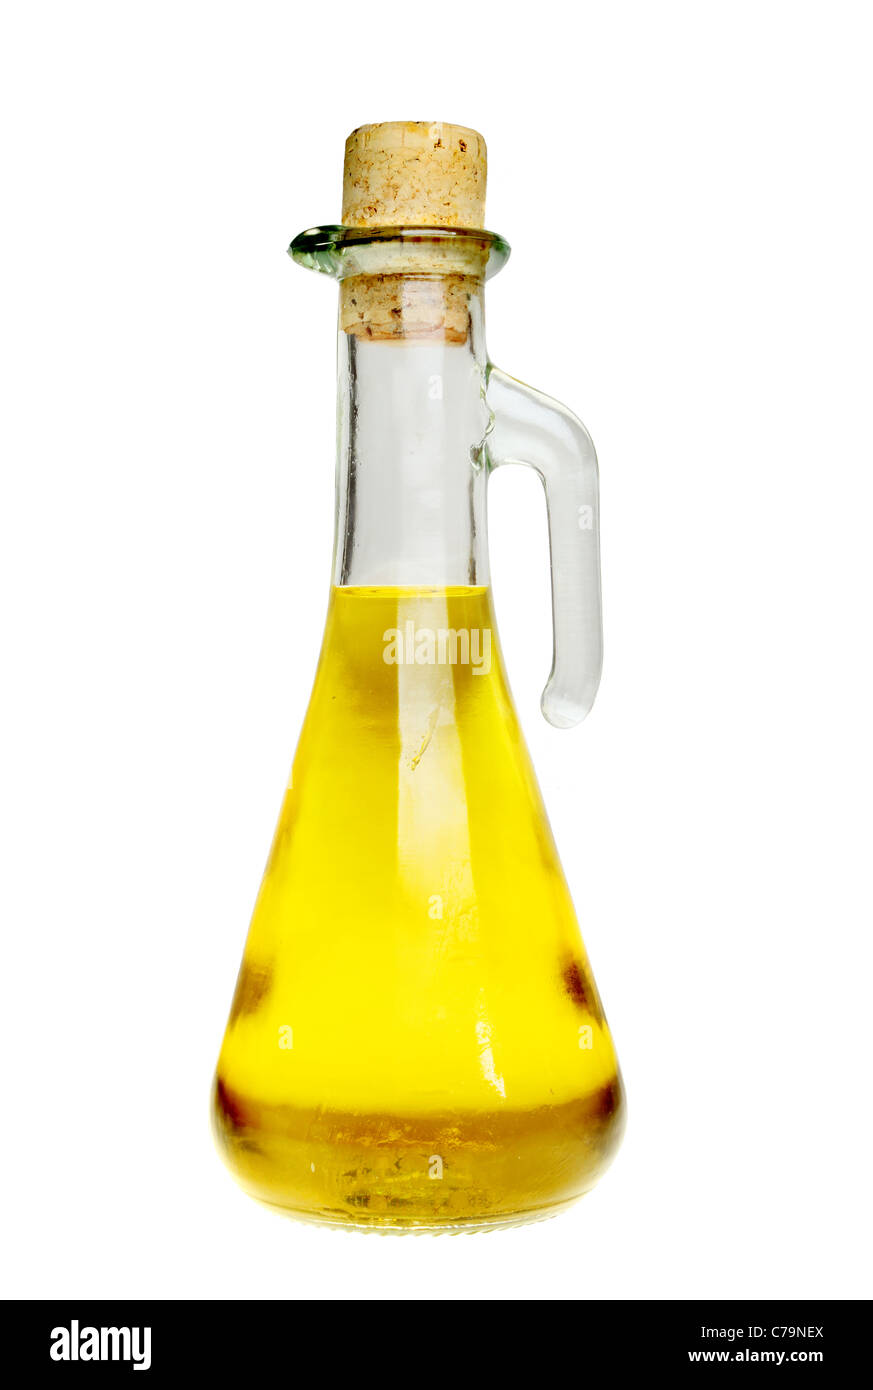 Glass jar of olive oil with a cork stopper isolated against white Stock Photo